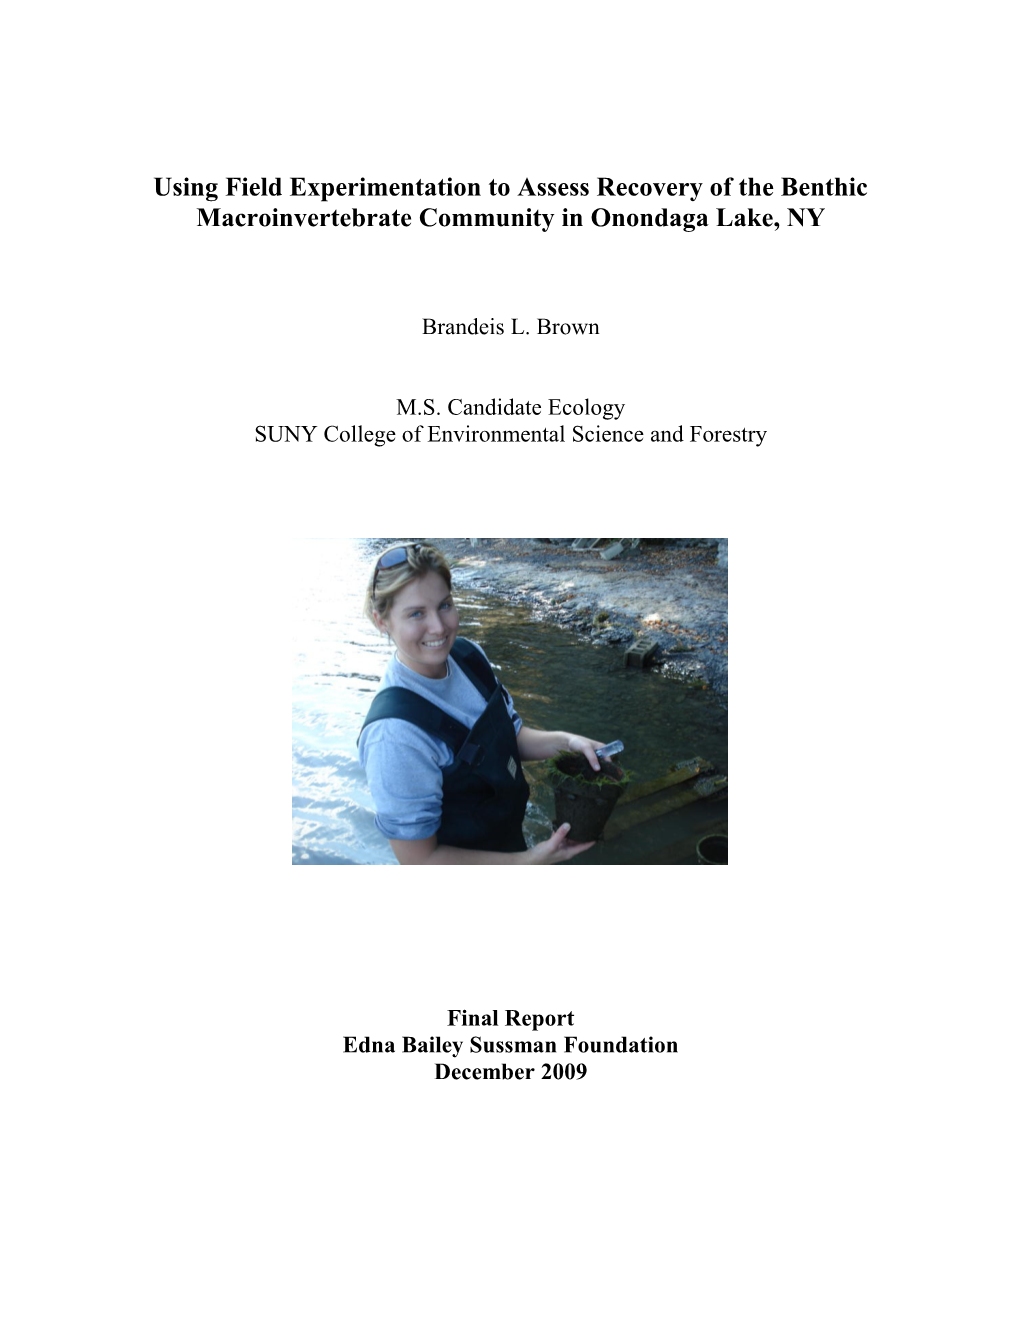 Using Field Experimentation to Assess Recovery of the Benthic Macroinvertebrate Community